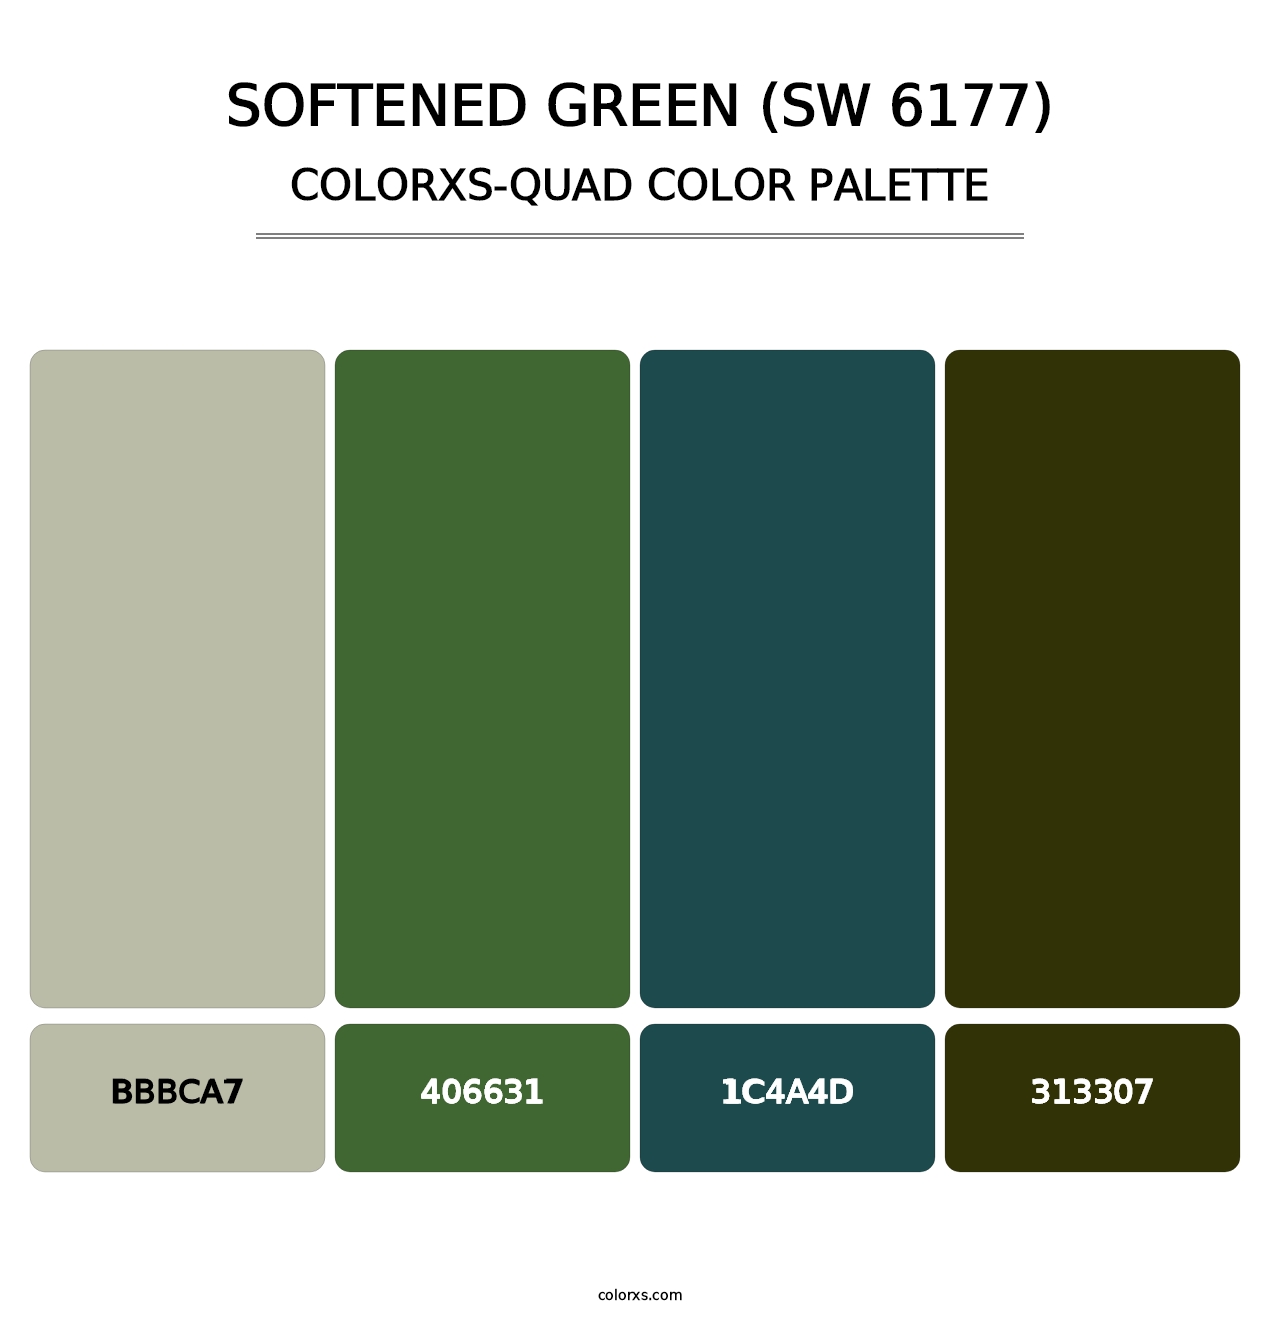 Softened Green (SW 6177) - Colorxs Quad Palette